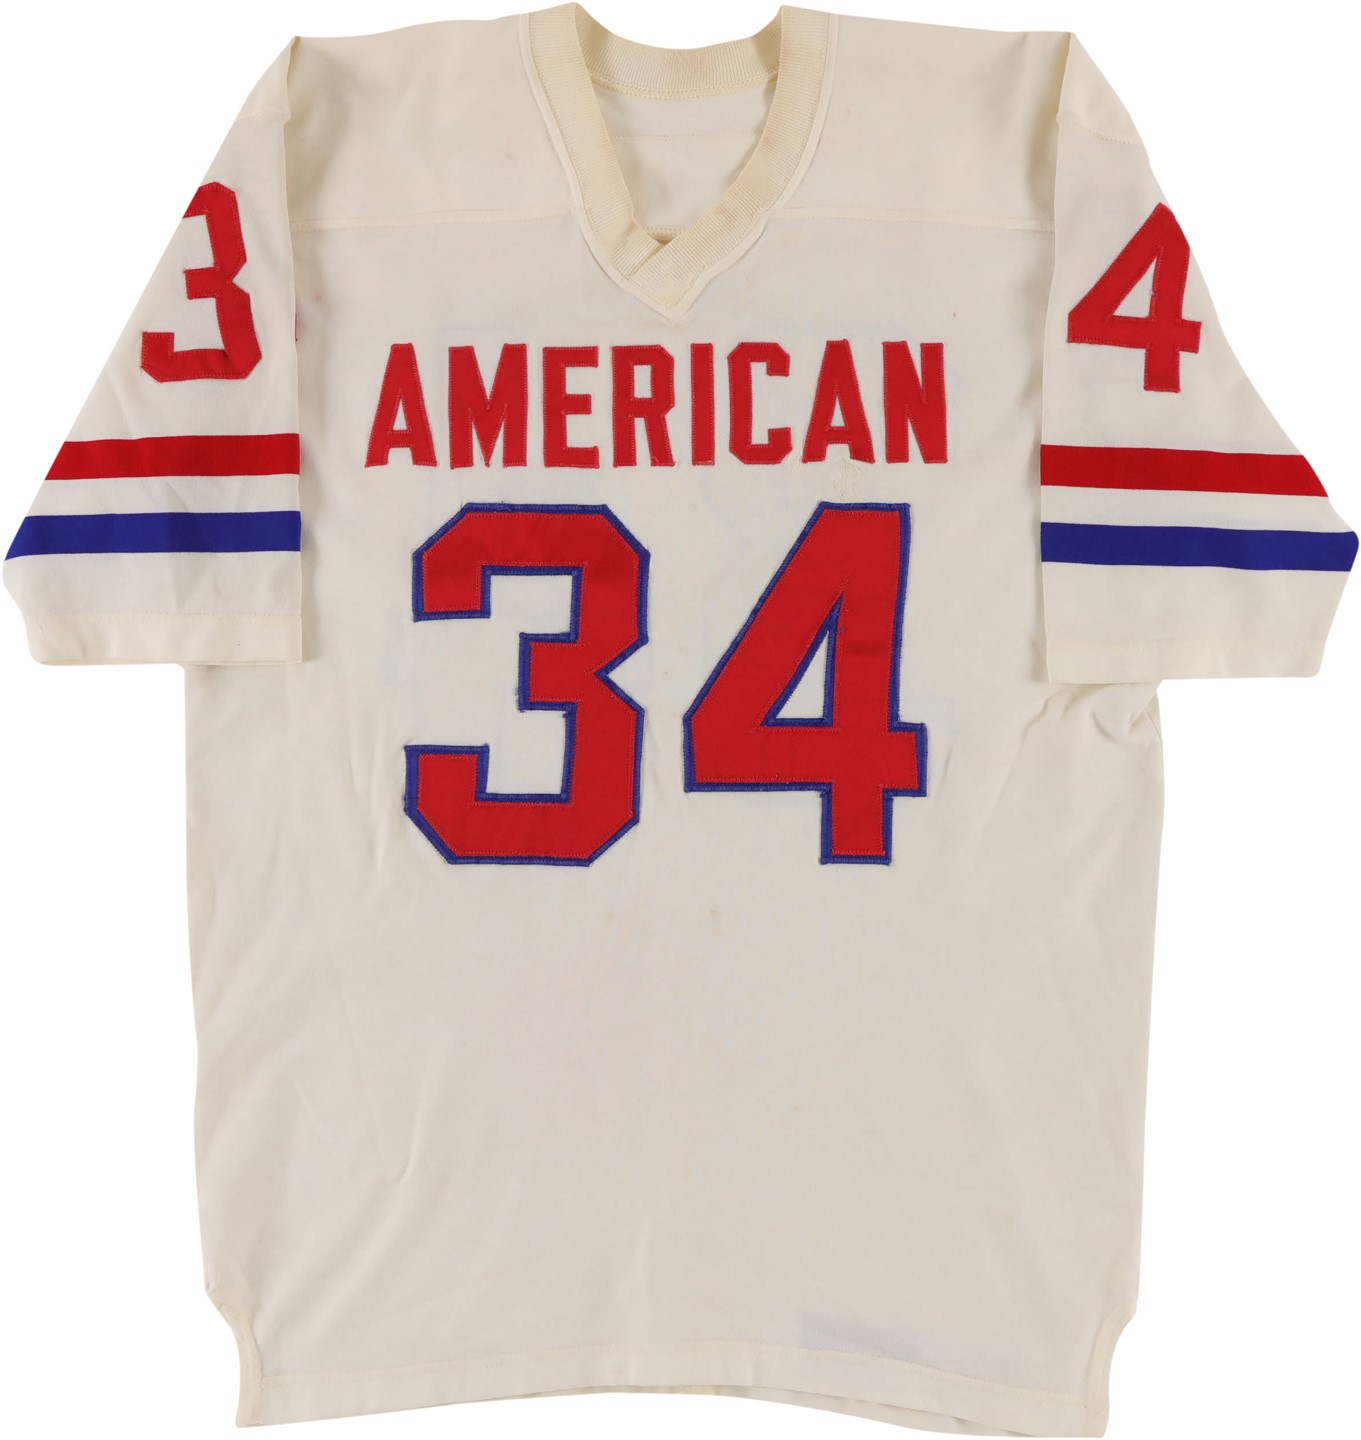 - Circa 1972 Andy Russell AFC Pro Bowl Game Worn Jersey